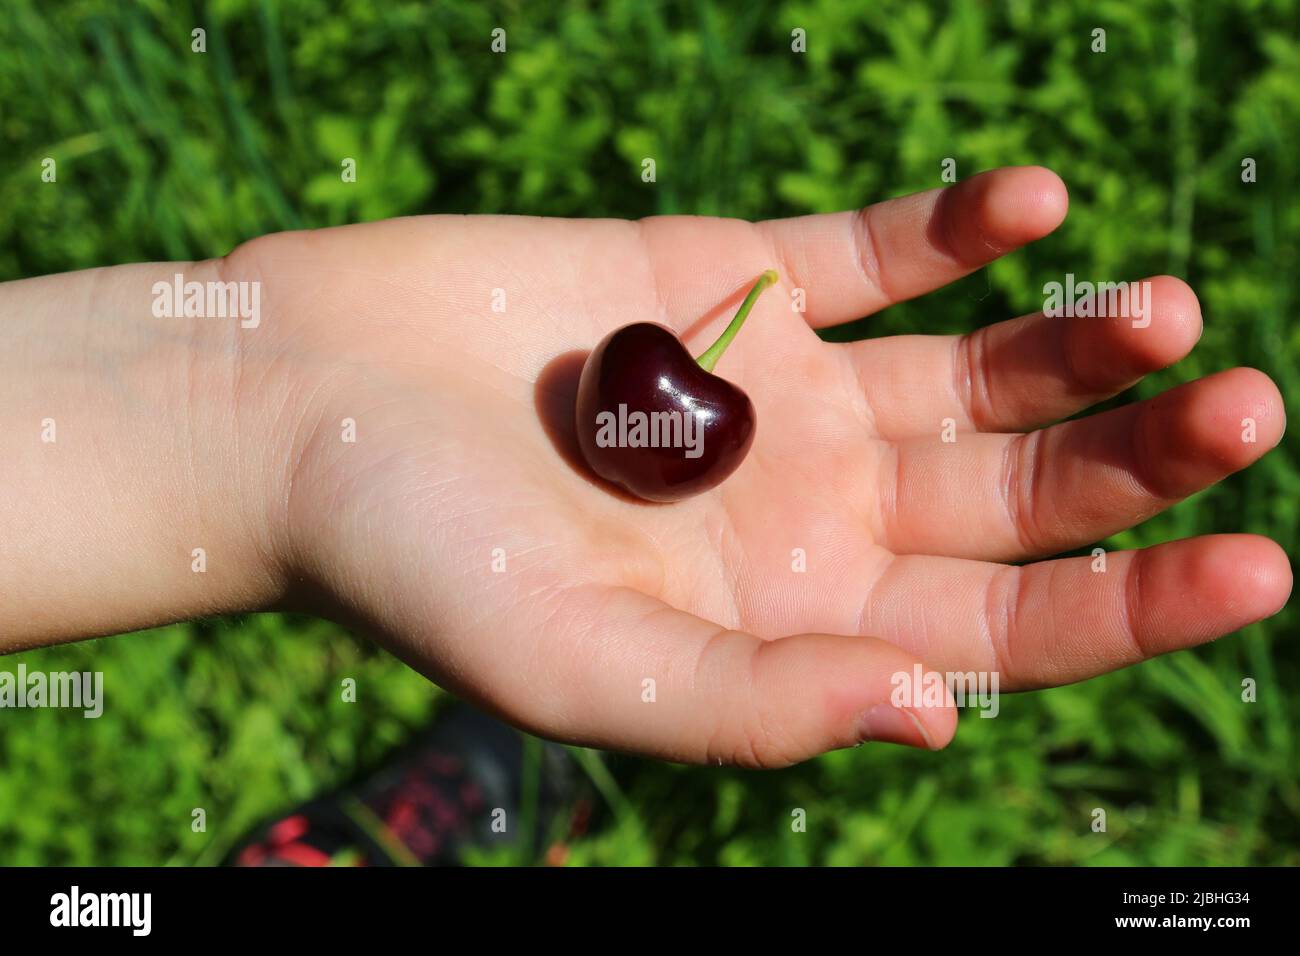 Vignola cherries, fresh ripe fruit in a hand, a typical Italian product Stock Photo